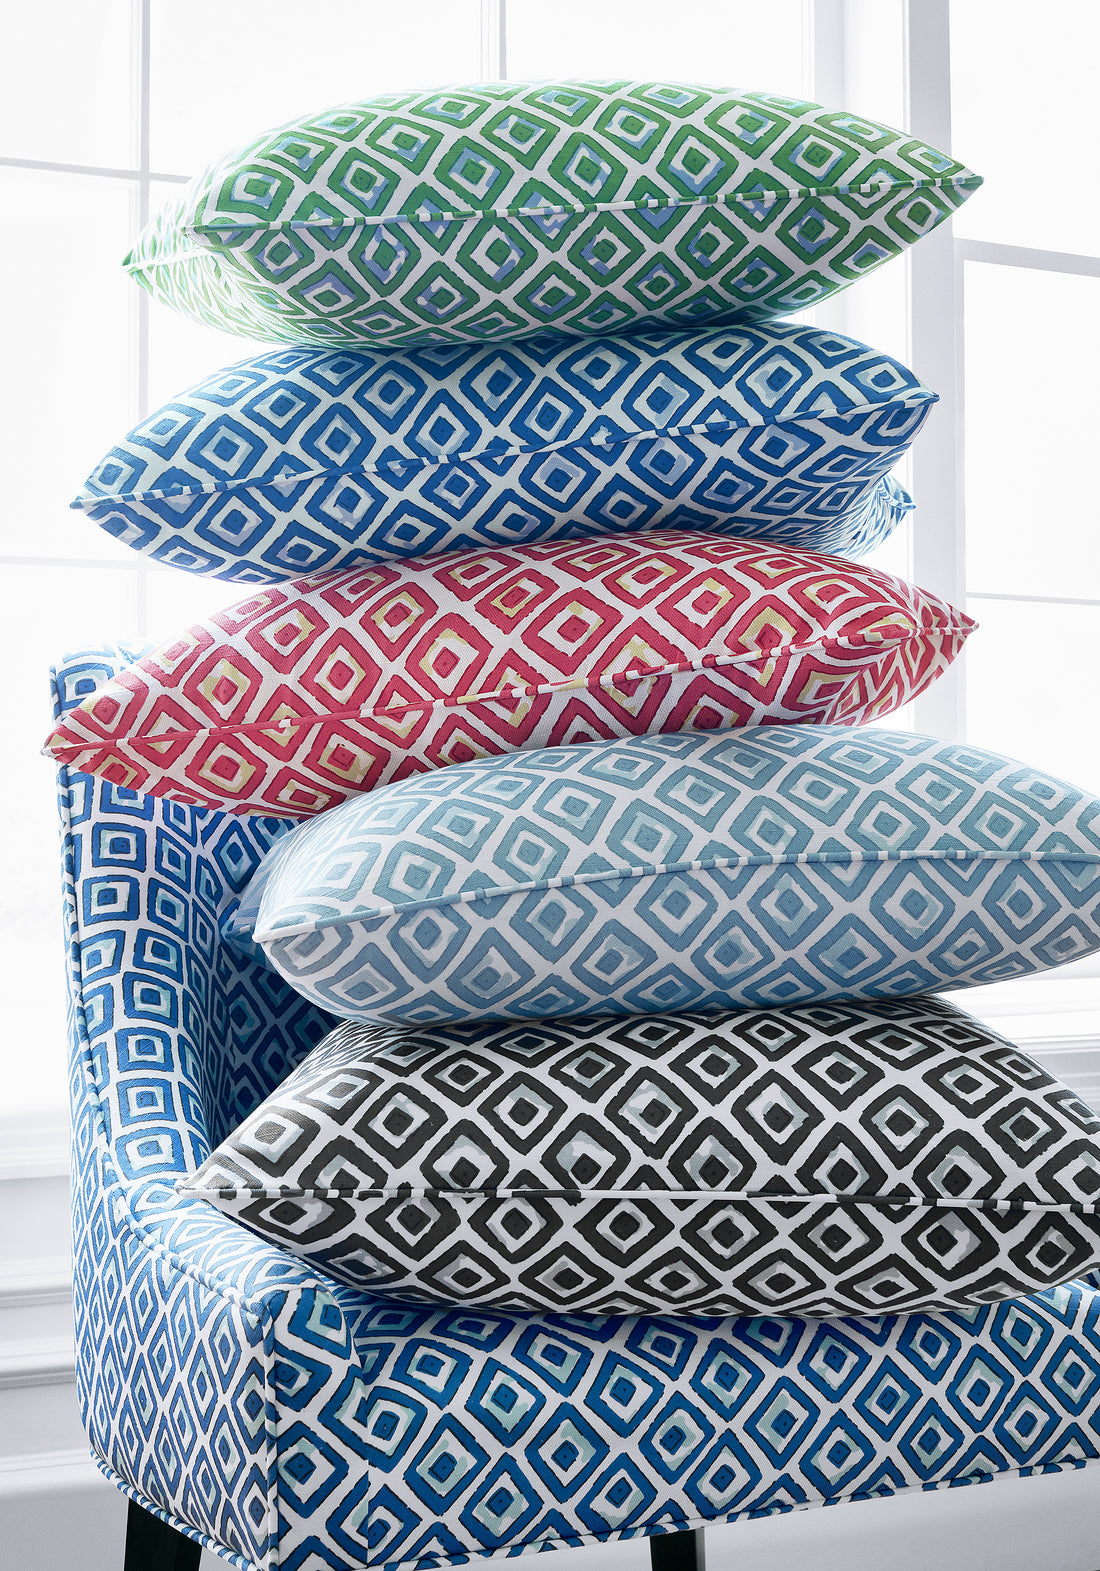 Pillow made with Thibaut Indian Diamond printed fabric in green color - pattern number F910659